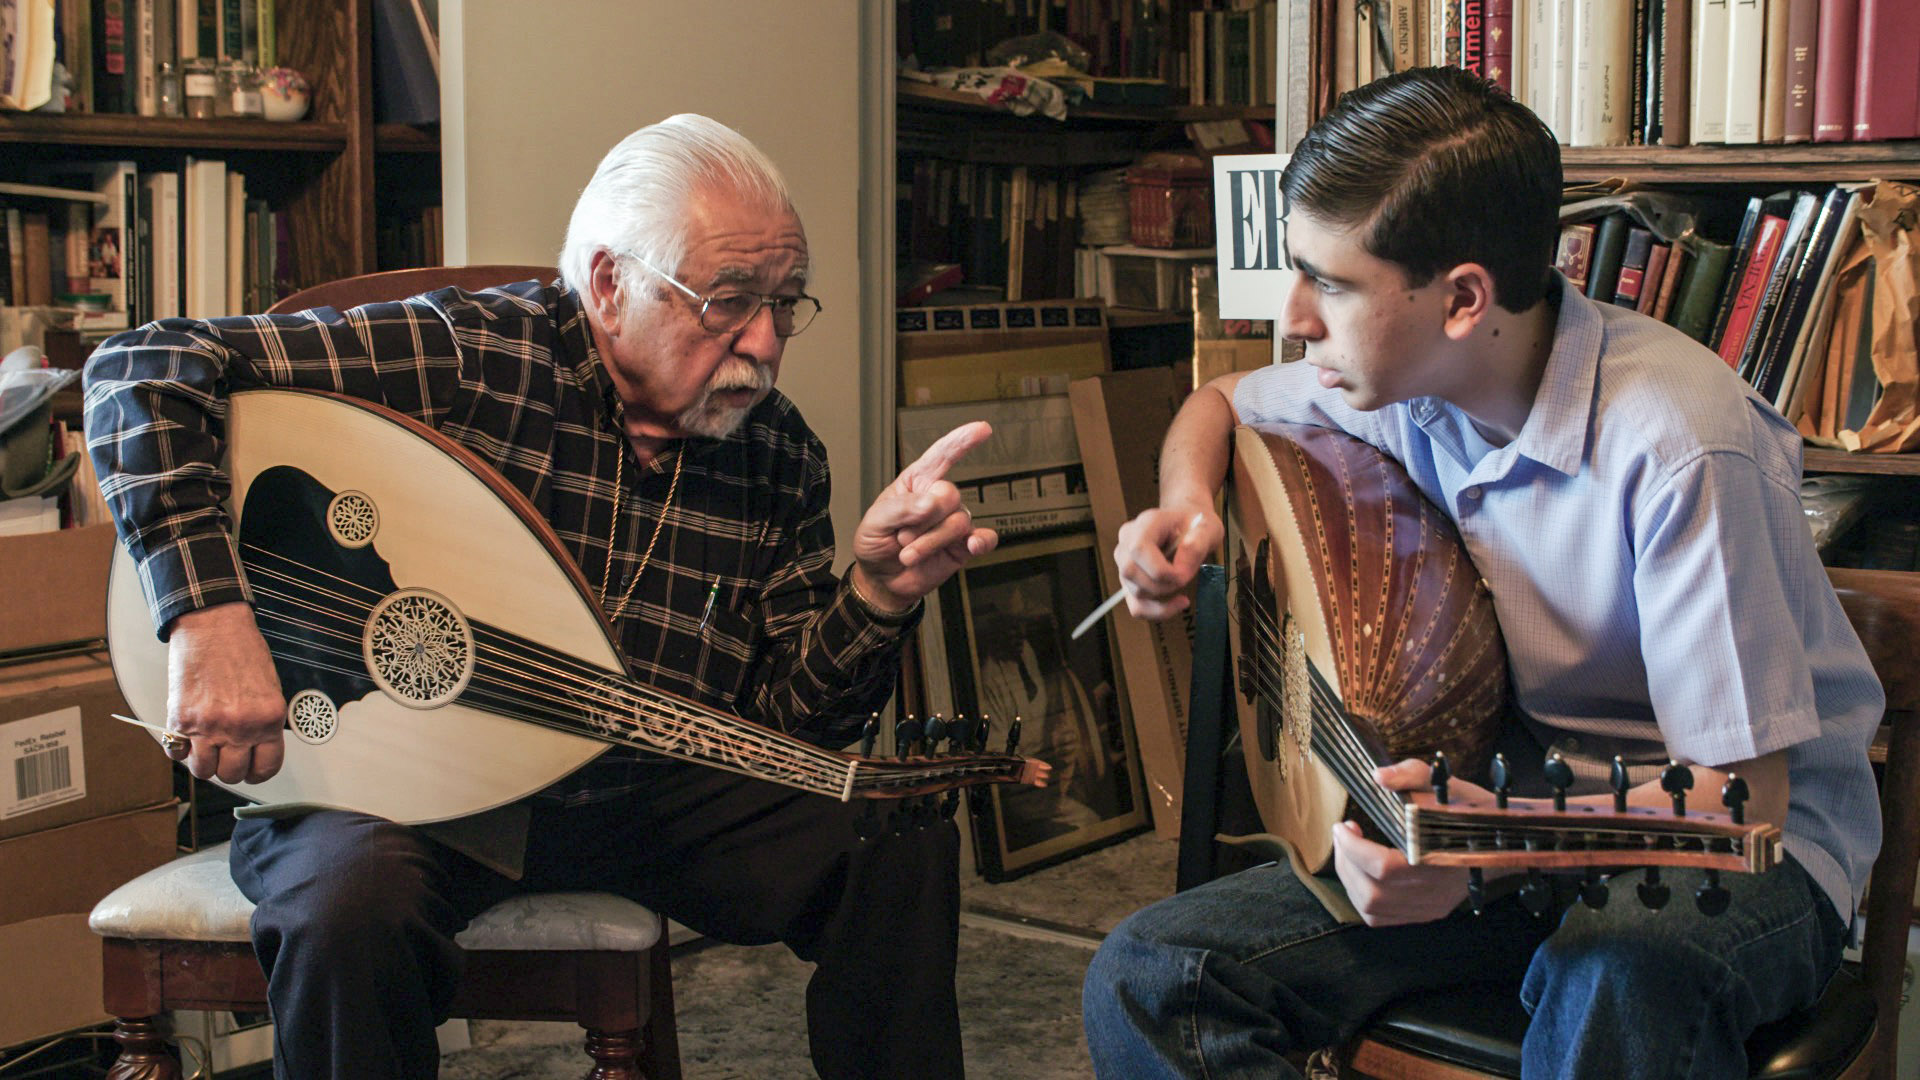   Richard Hagopian and Andrew Hagopian    Oud Master and His Grandson   Passing on an unwritten tradition to his grandson, a rare fifteen-year old who embraces this legacy wholeheartedly. 